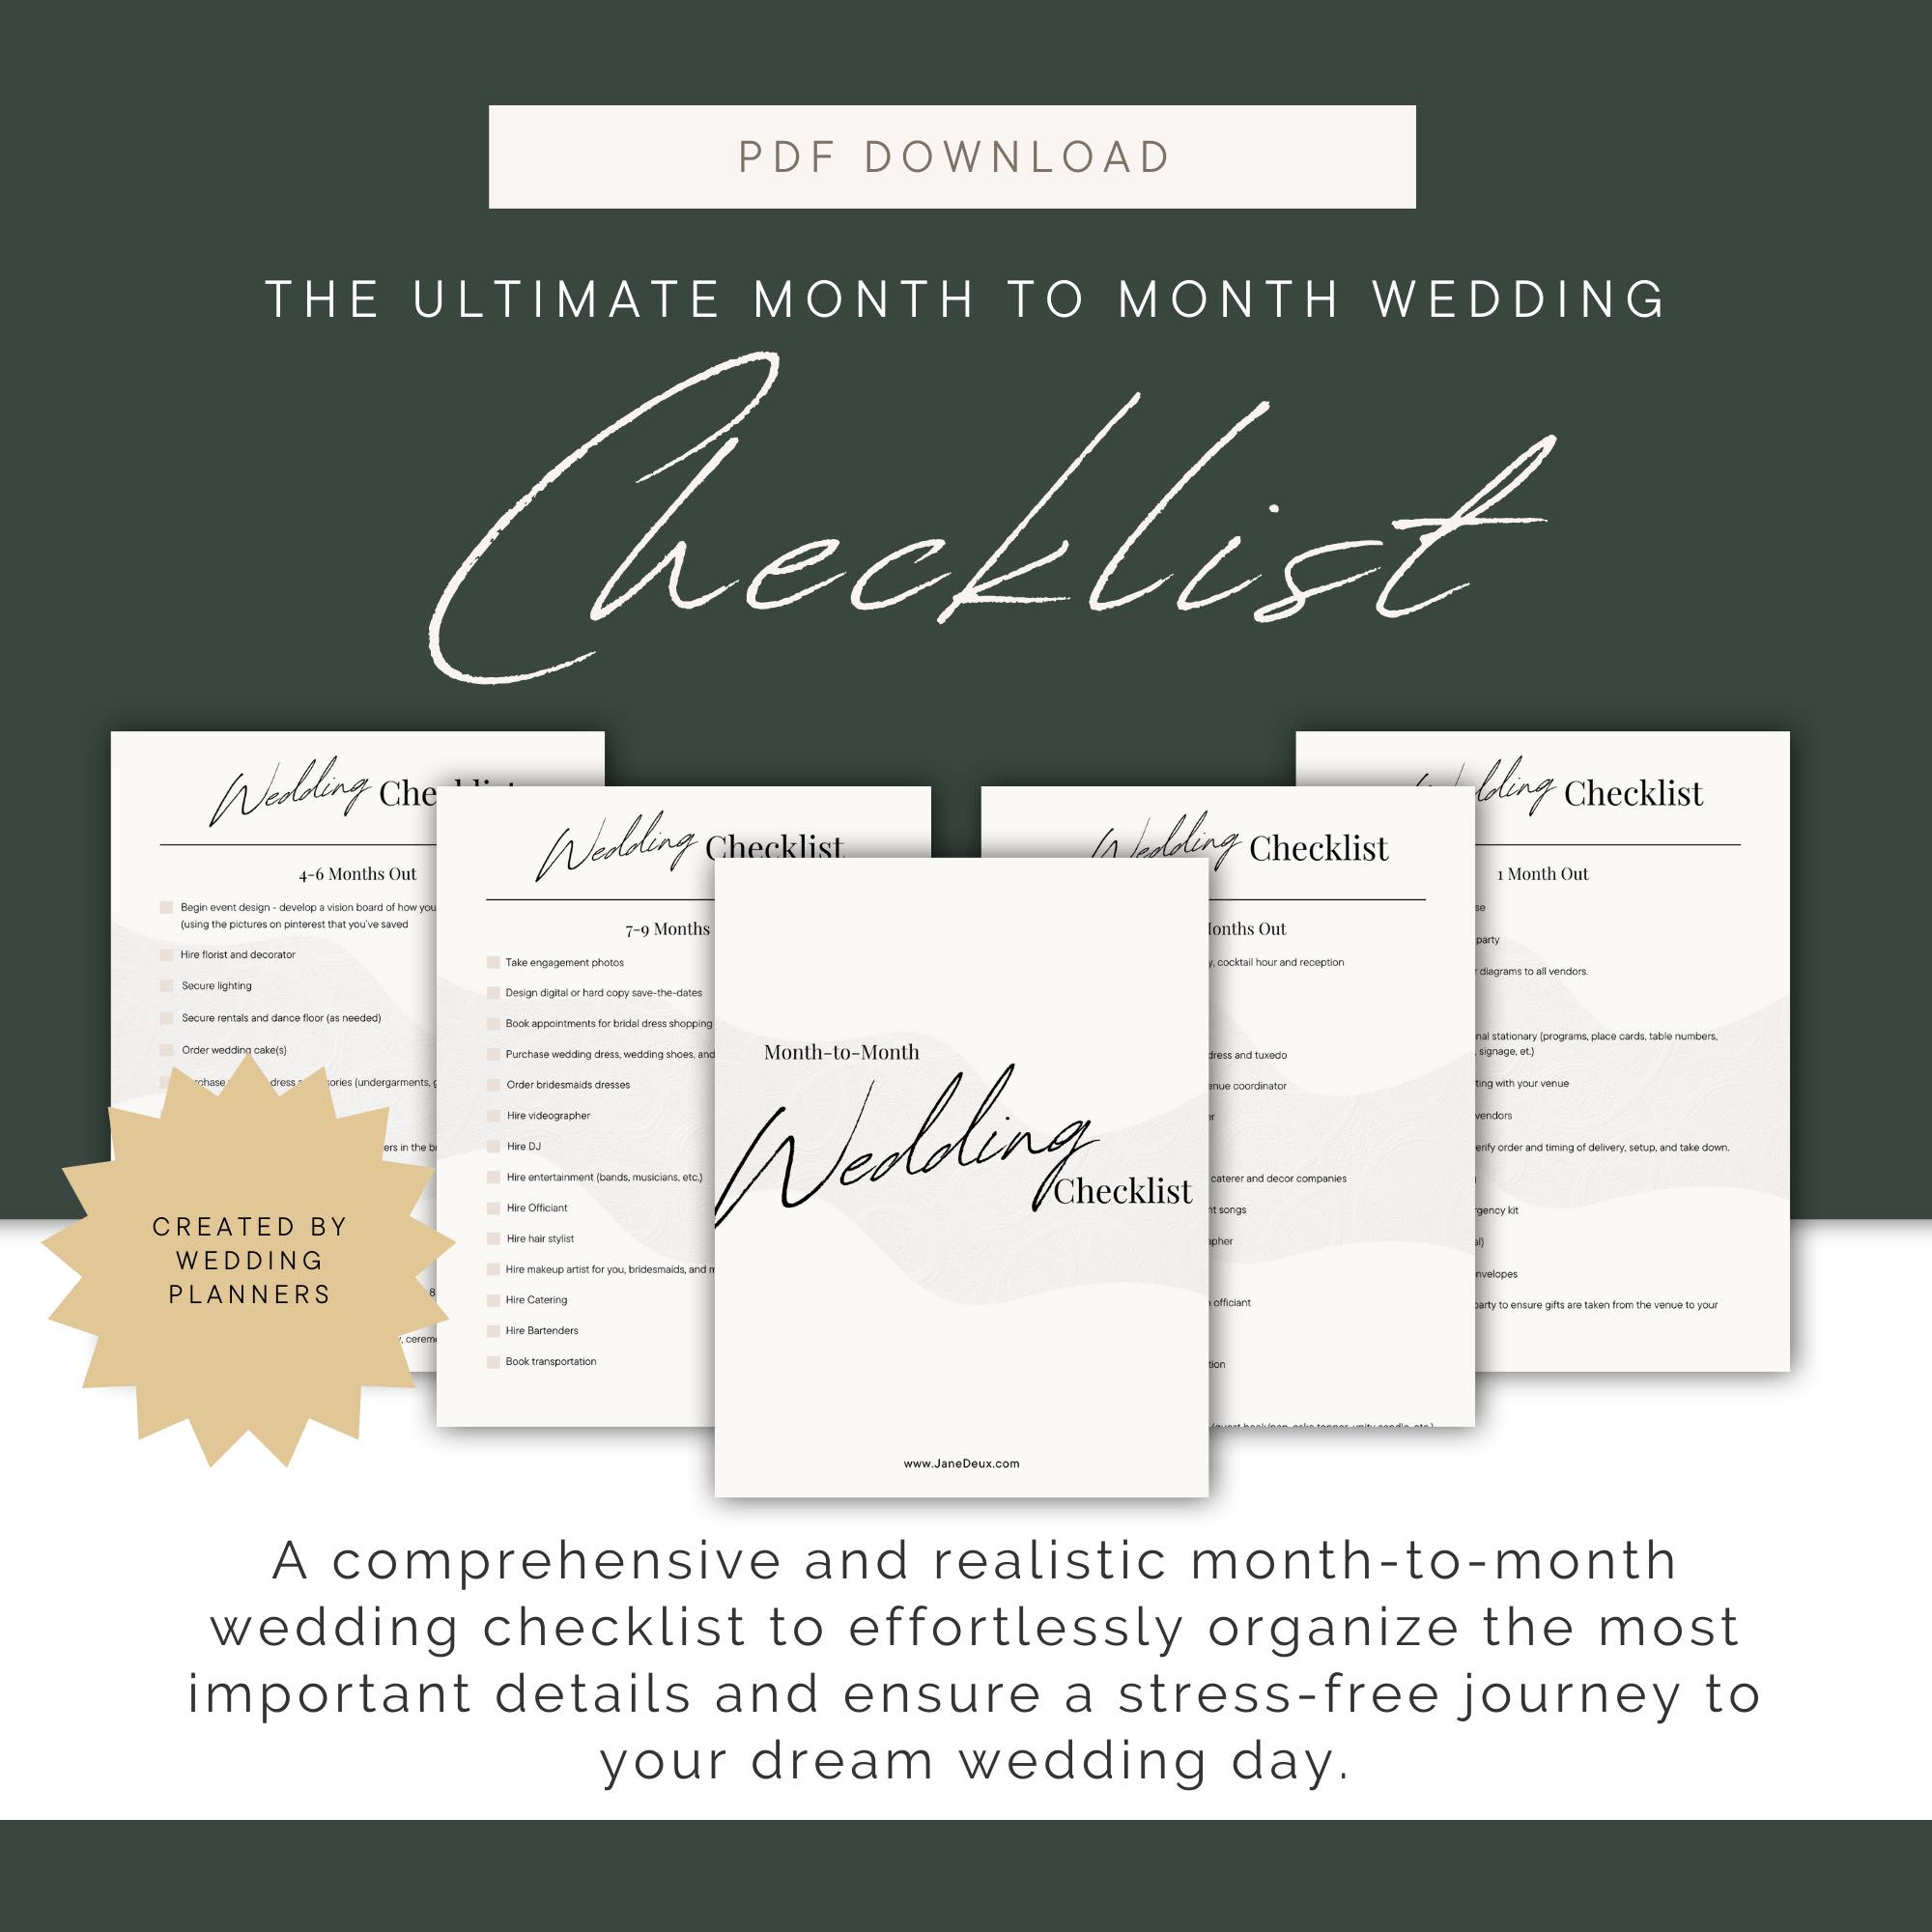 A promotional image for a month-to-month wedding checklist planner designed to organize the journey to an event planning perfect wedding day.